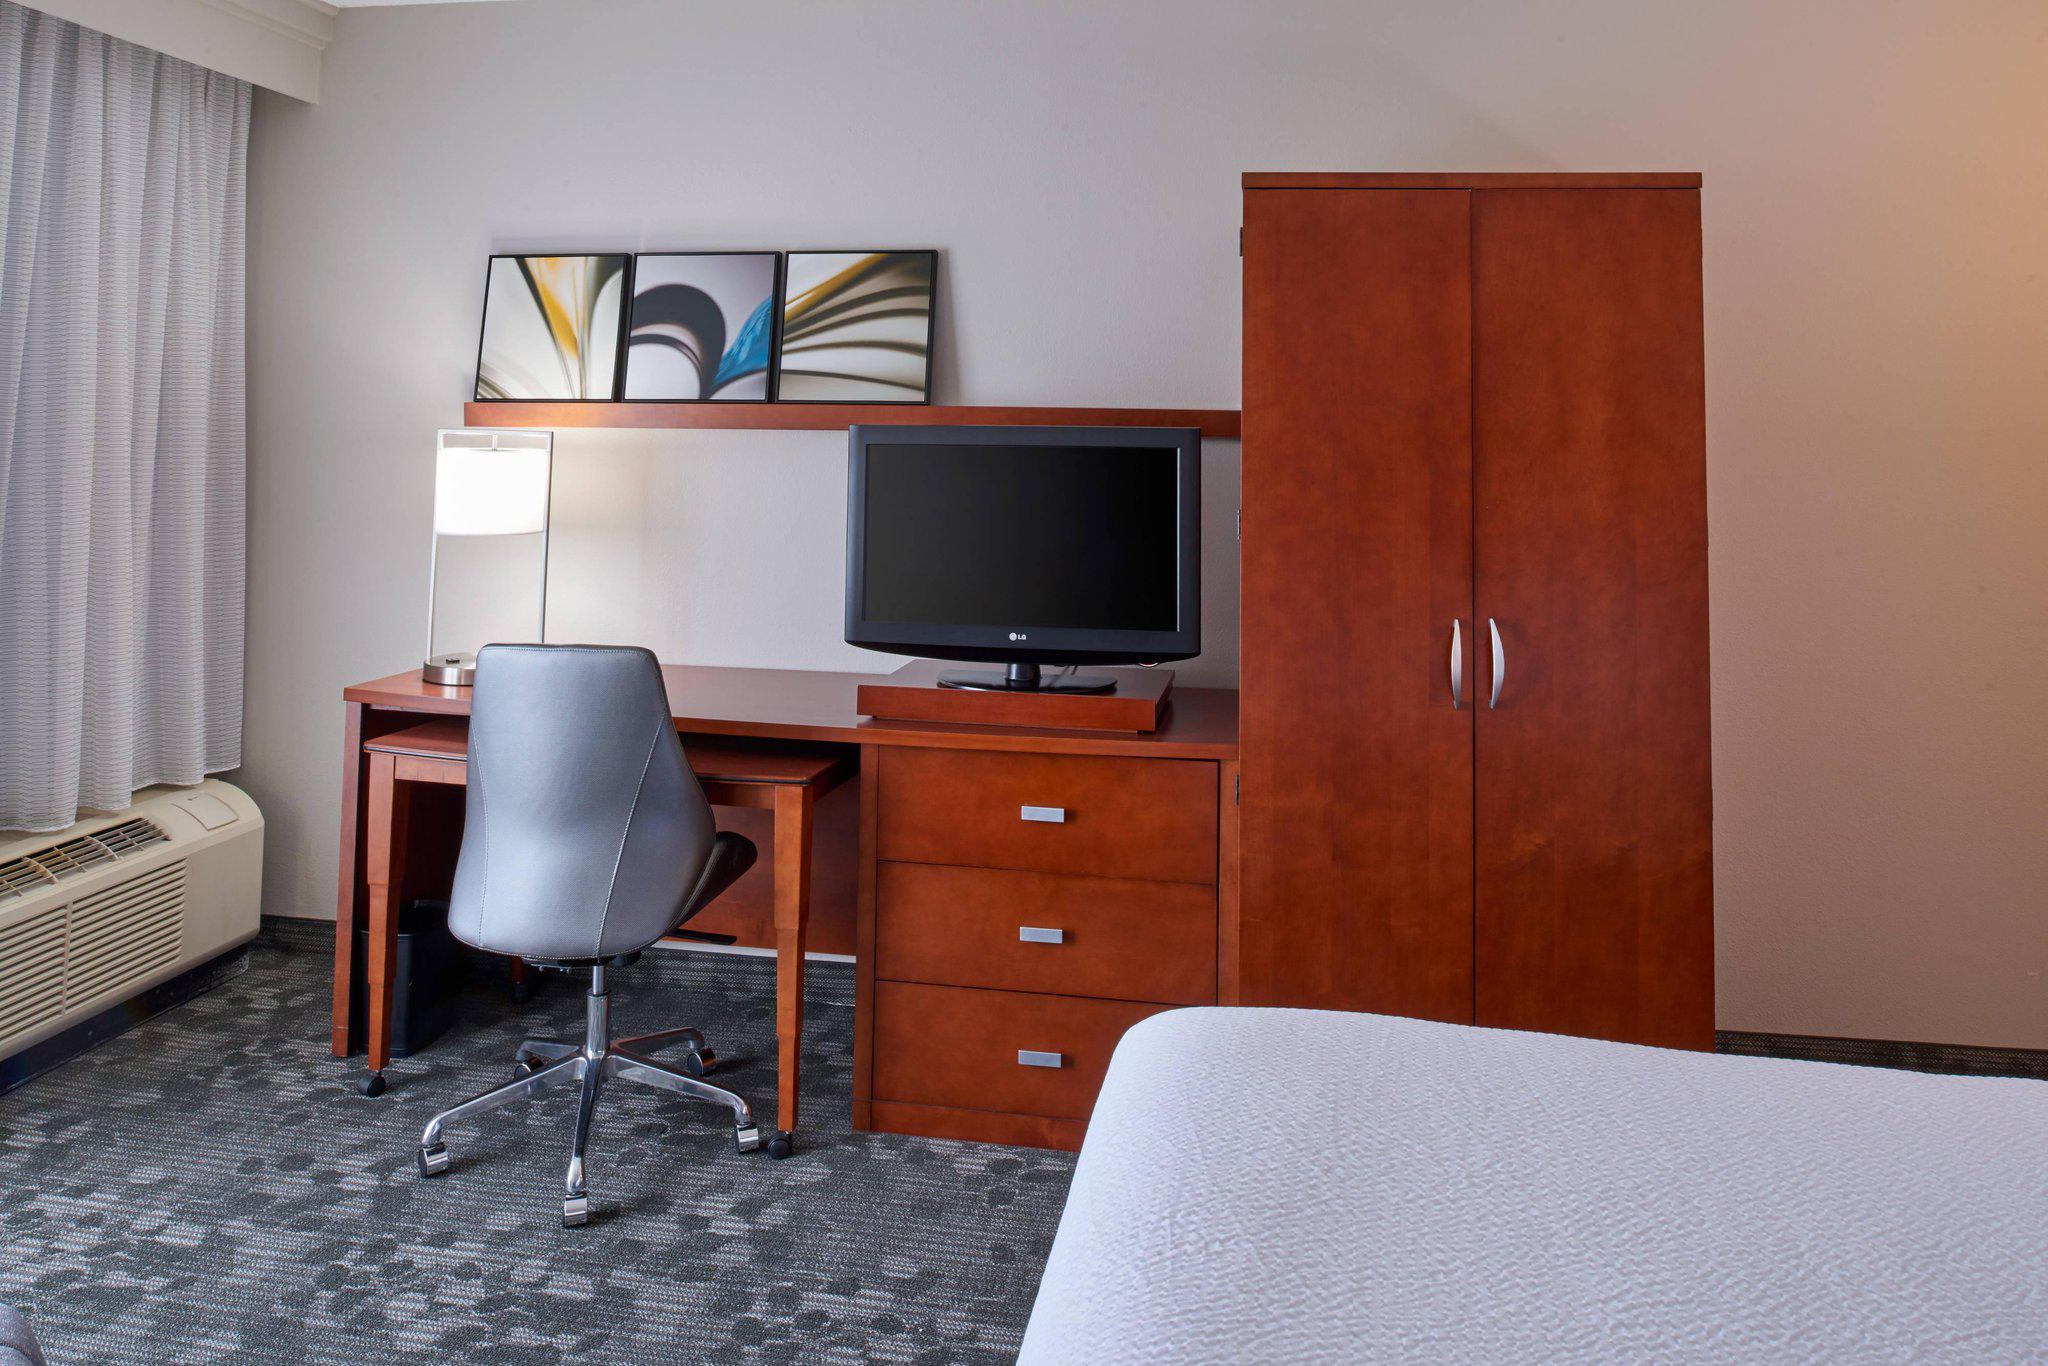 Courtyard by Marriott Indianapolis Carmel Photo